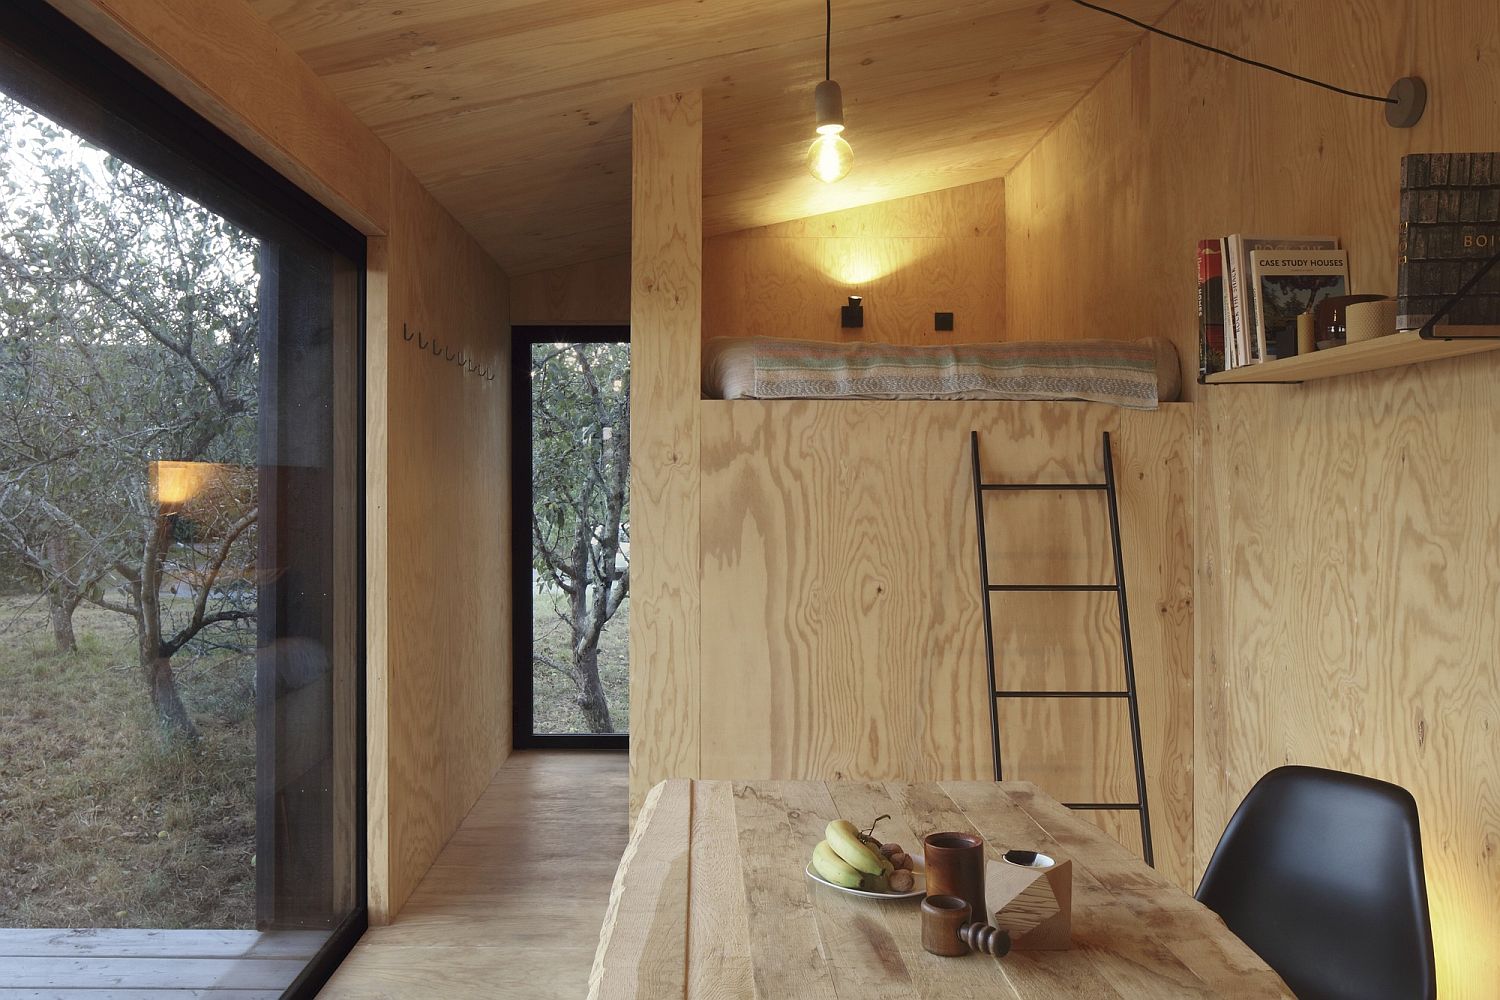 Contrast with light and dark wood elements shapes the lovely cabin